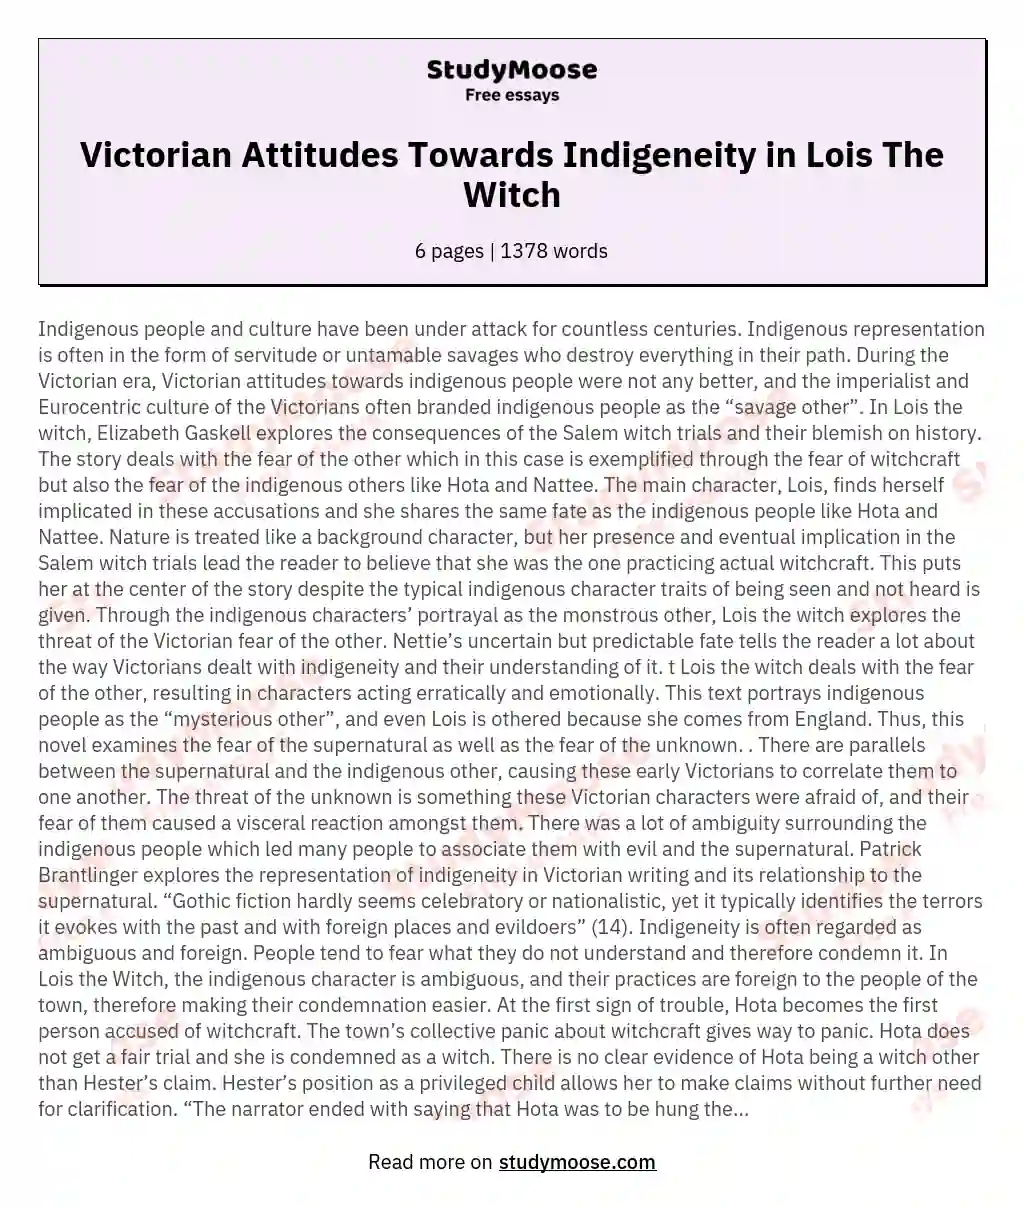 Victorian Attitudes Towards Indigeneity in Lois The Witch essay